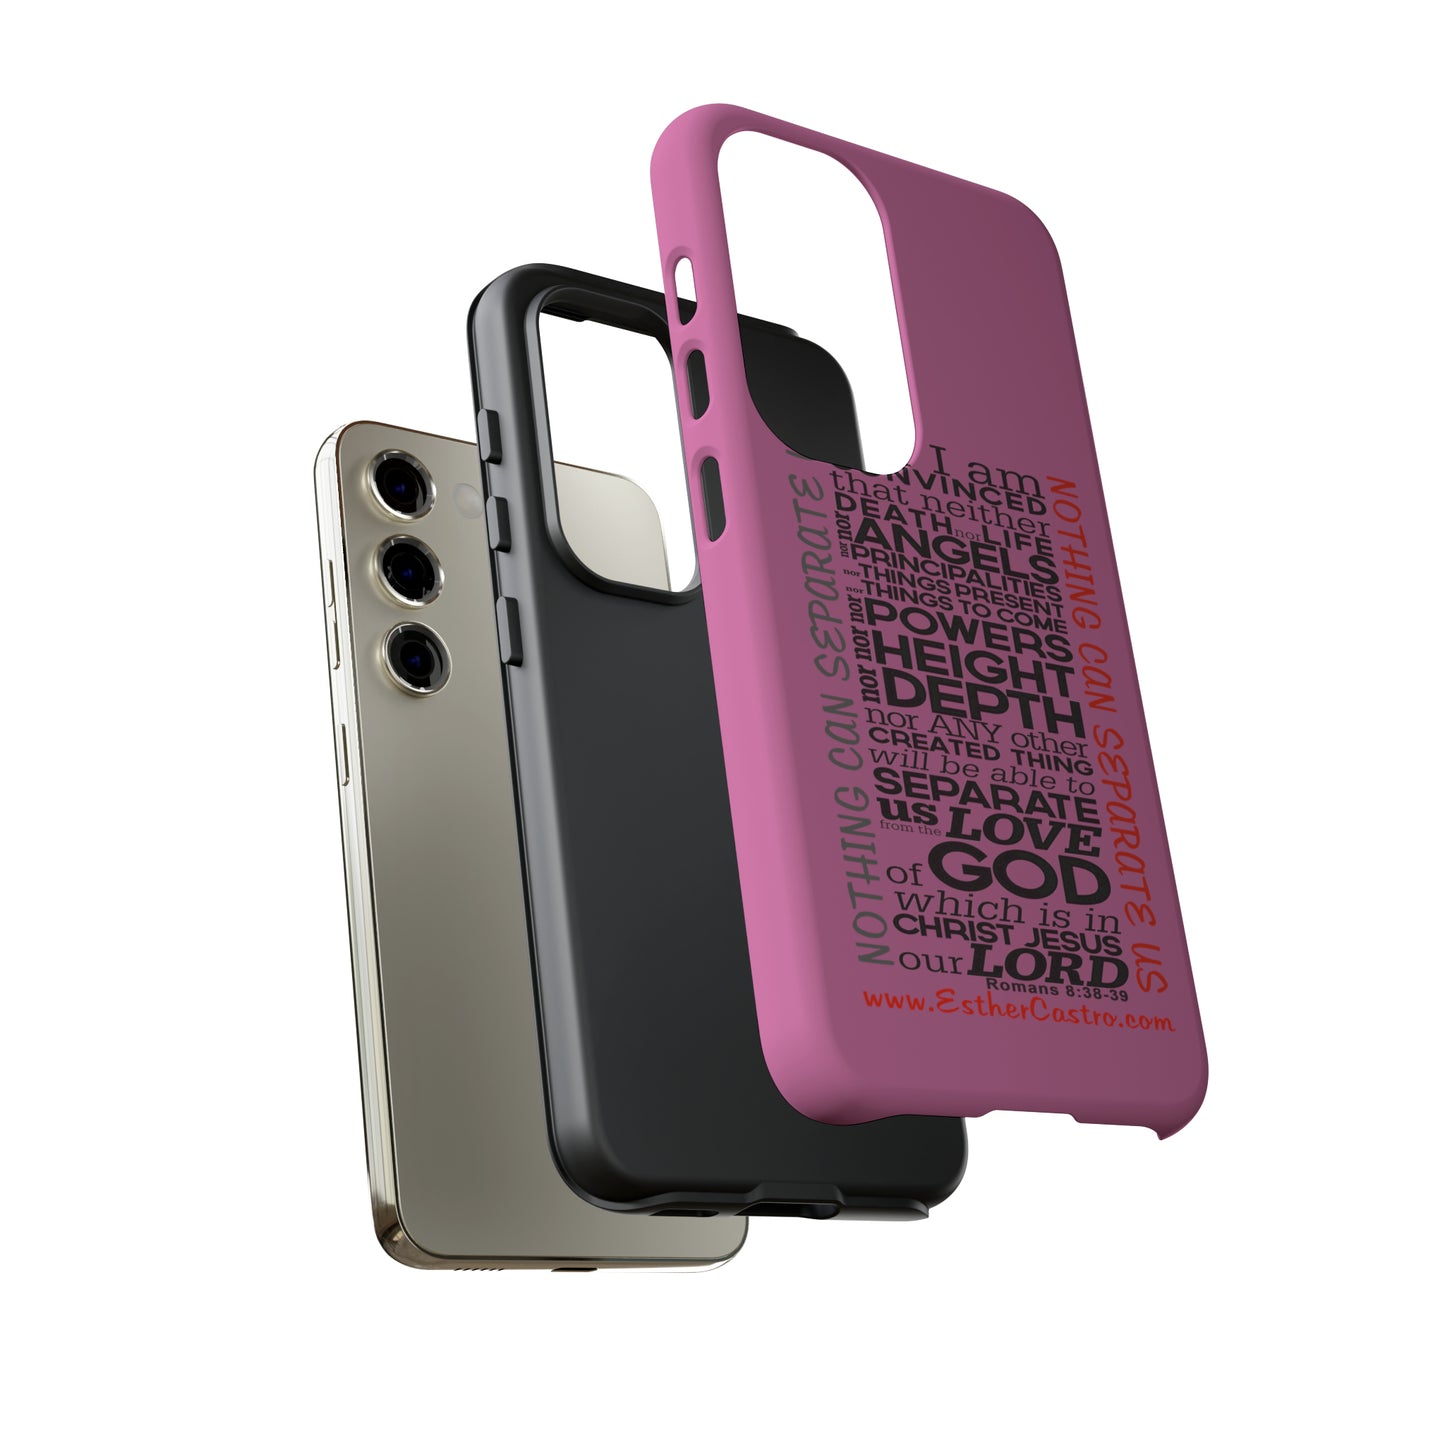 Tough Cases for Smart Phones - "Nothing Can Separate Us" Christian customized Tough Cases Romans 8, smartphone covers